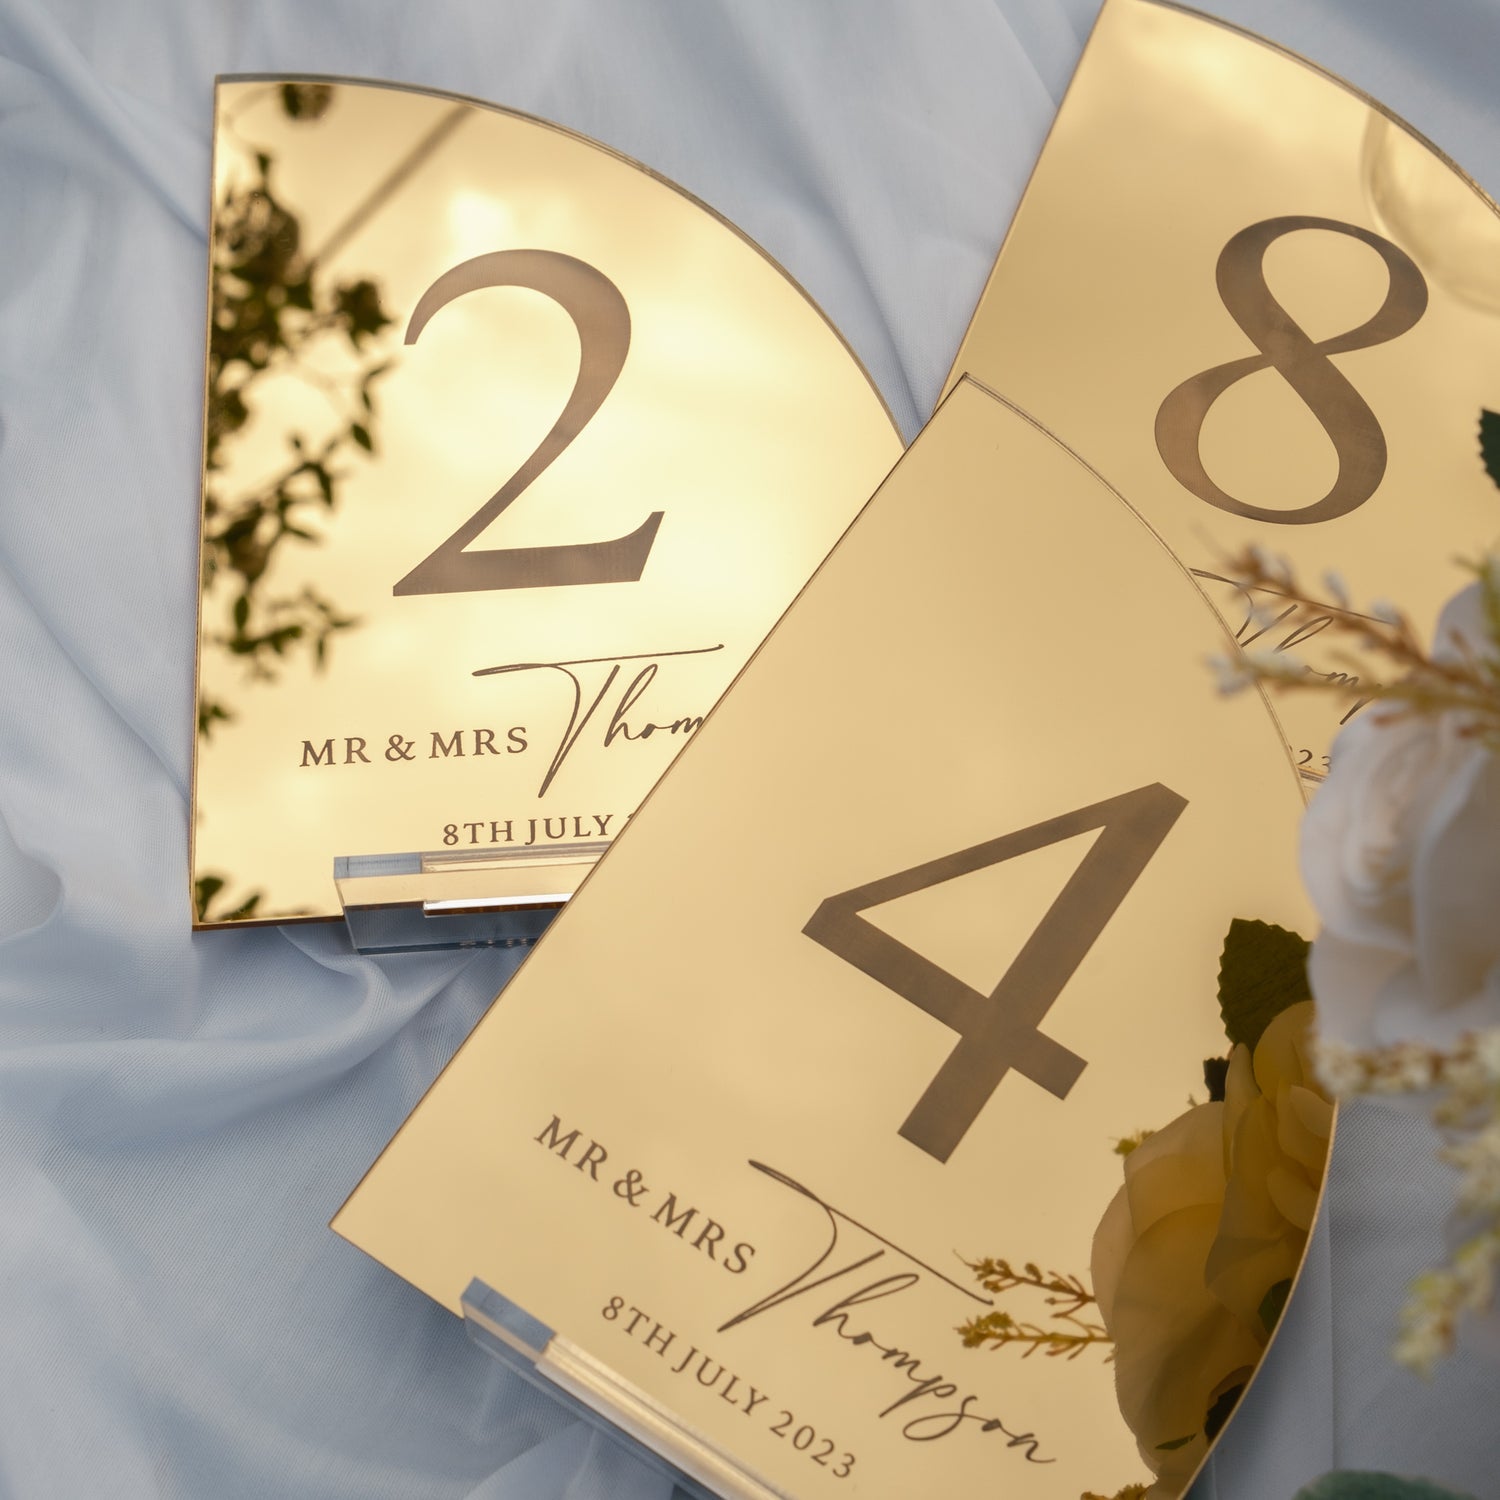 Personalised Table number signs